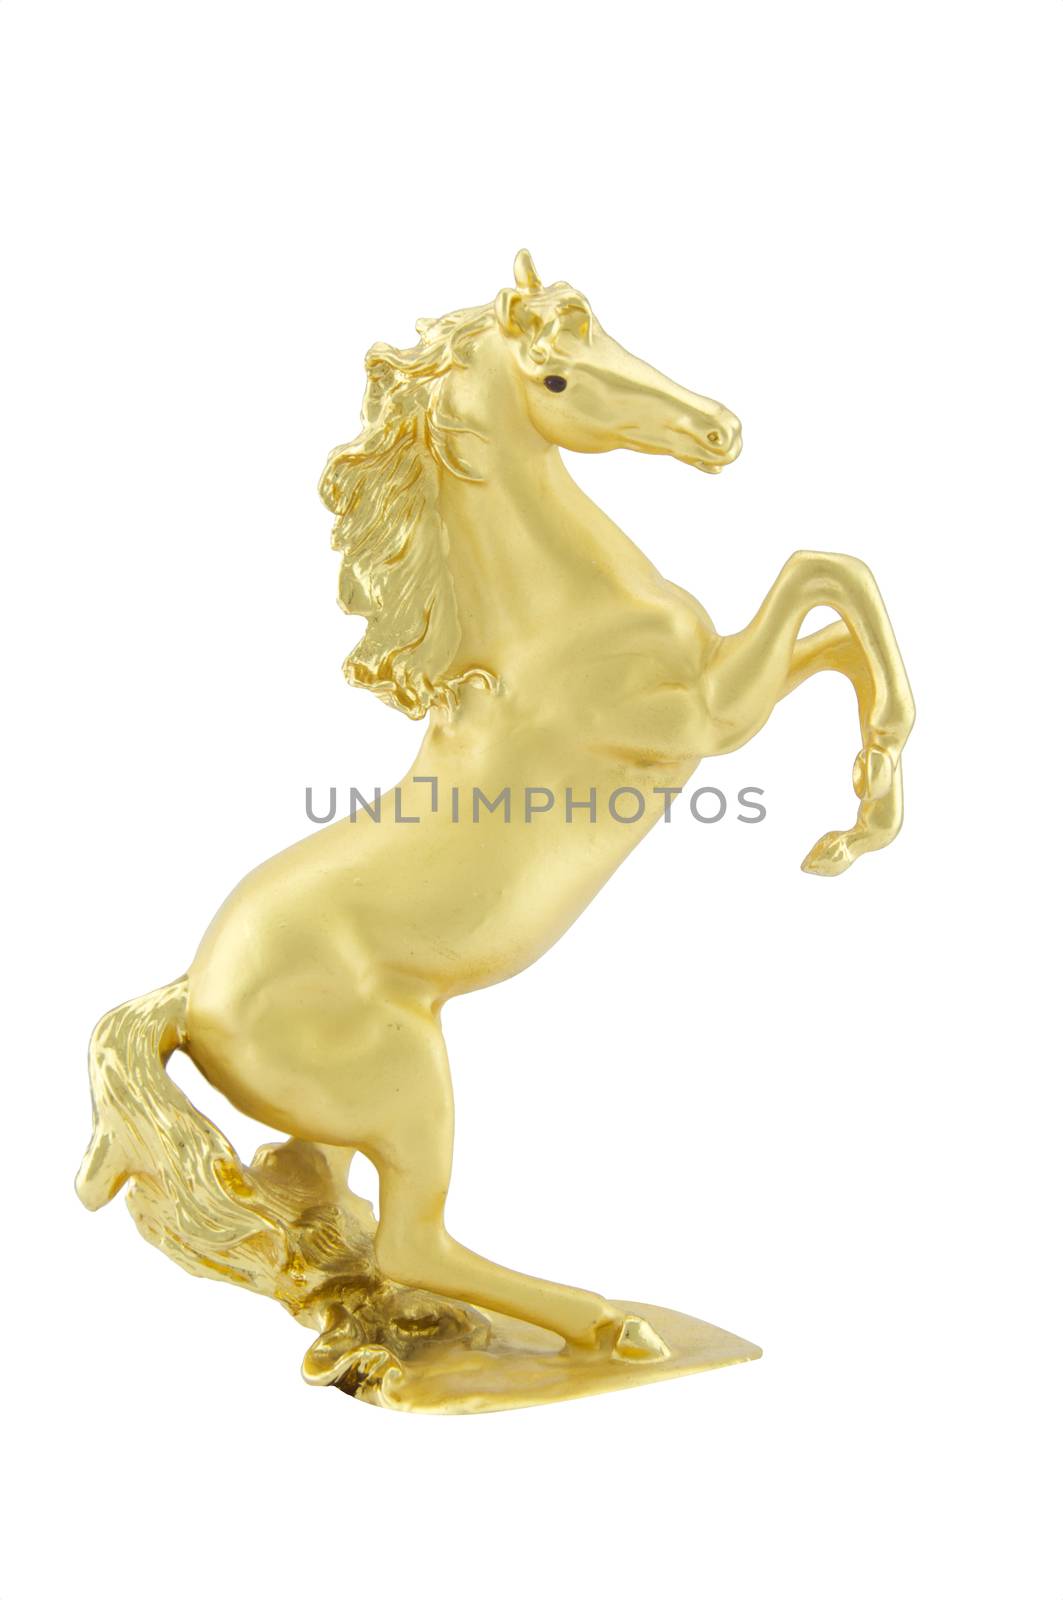 Golden horse statue luxury accessories for you.